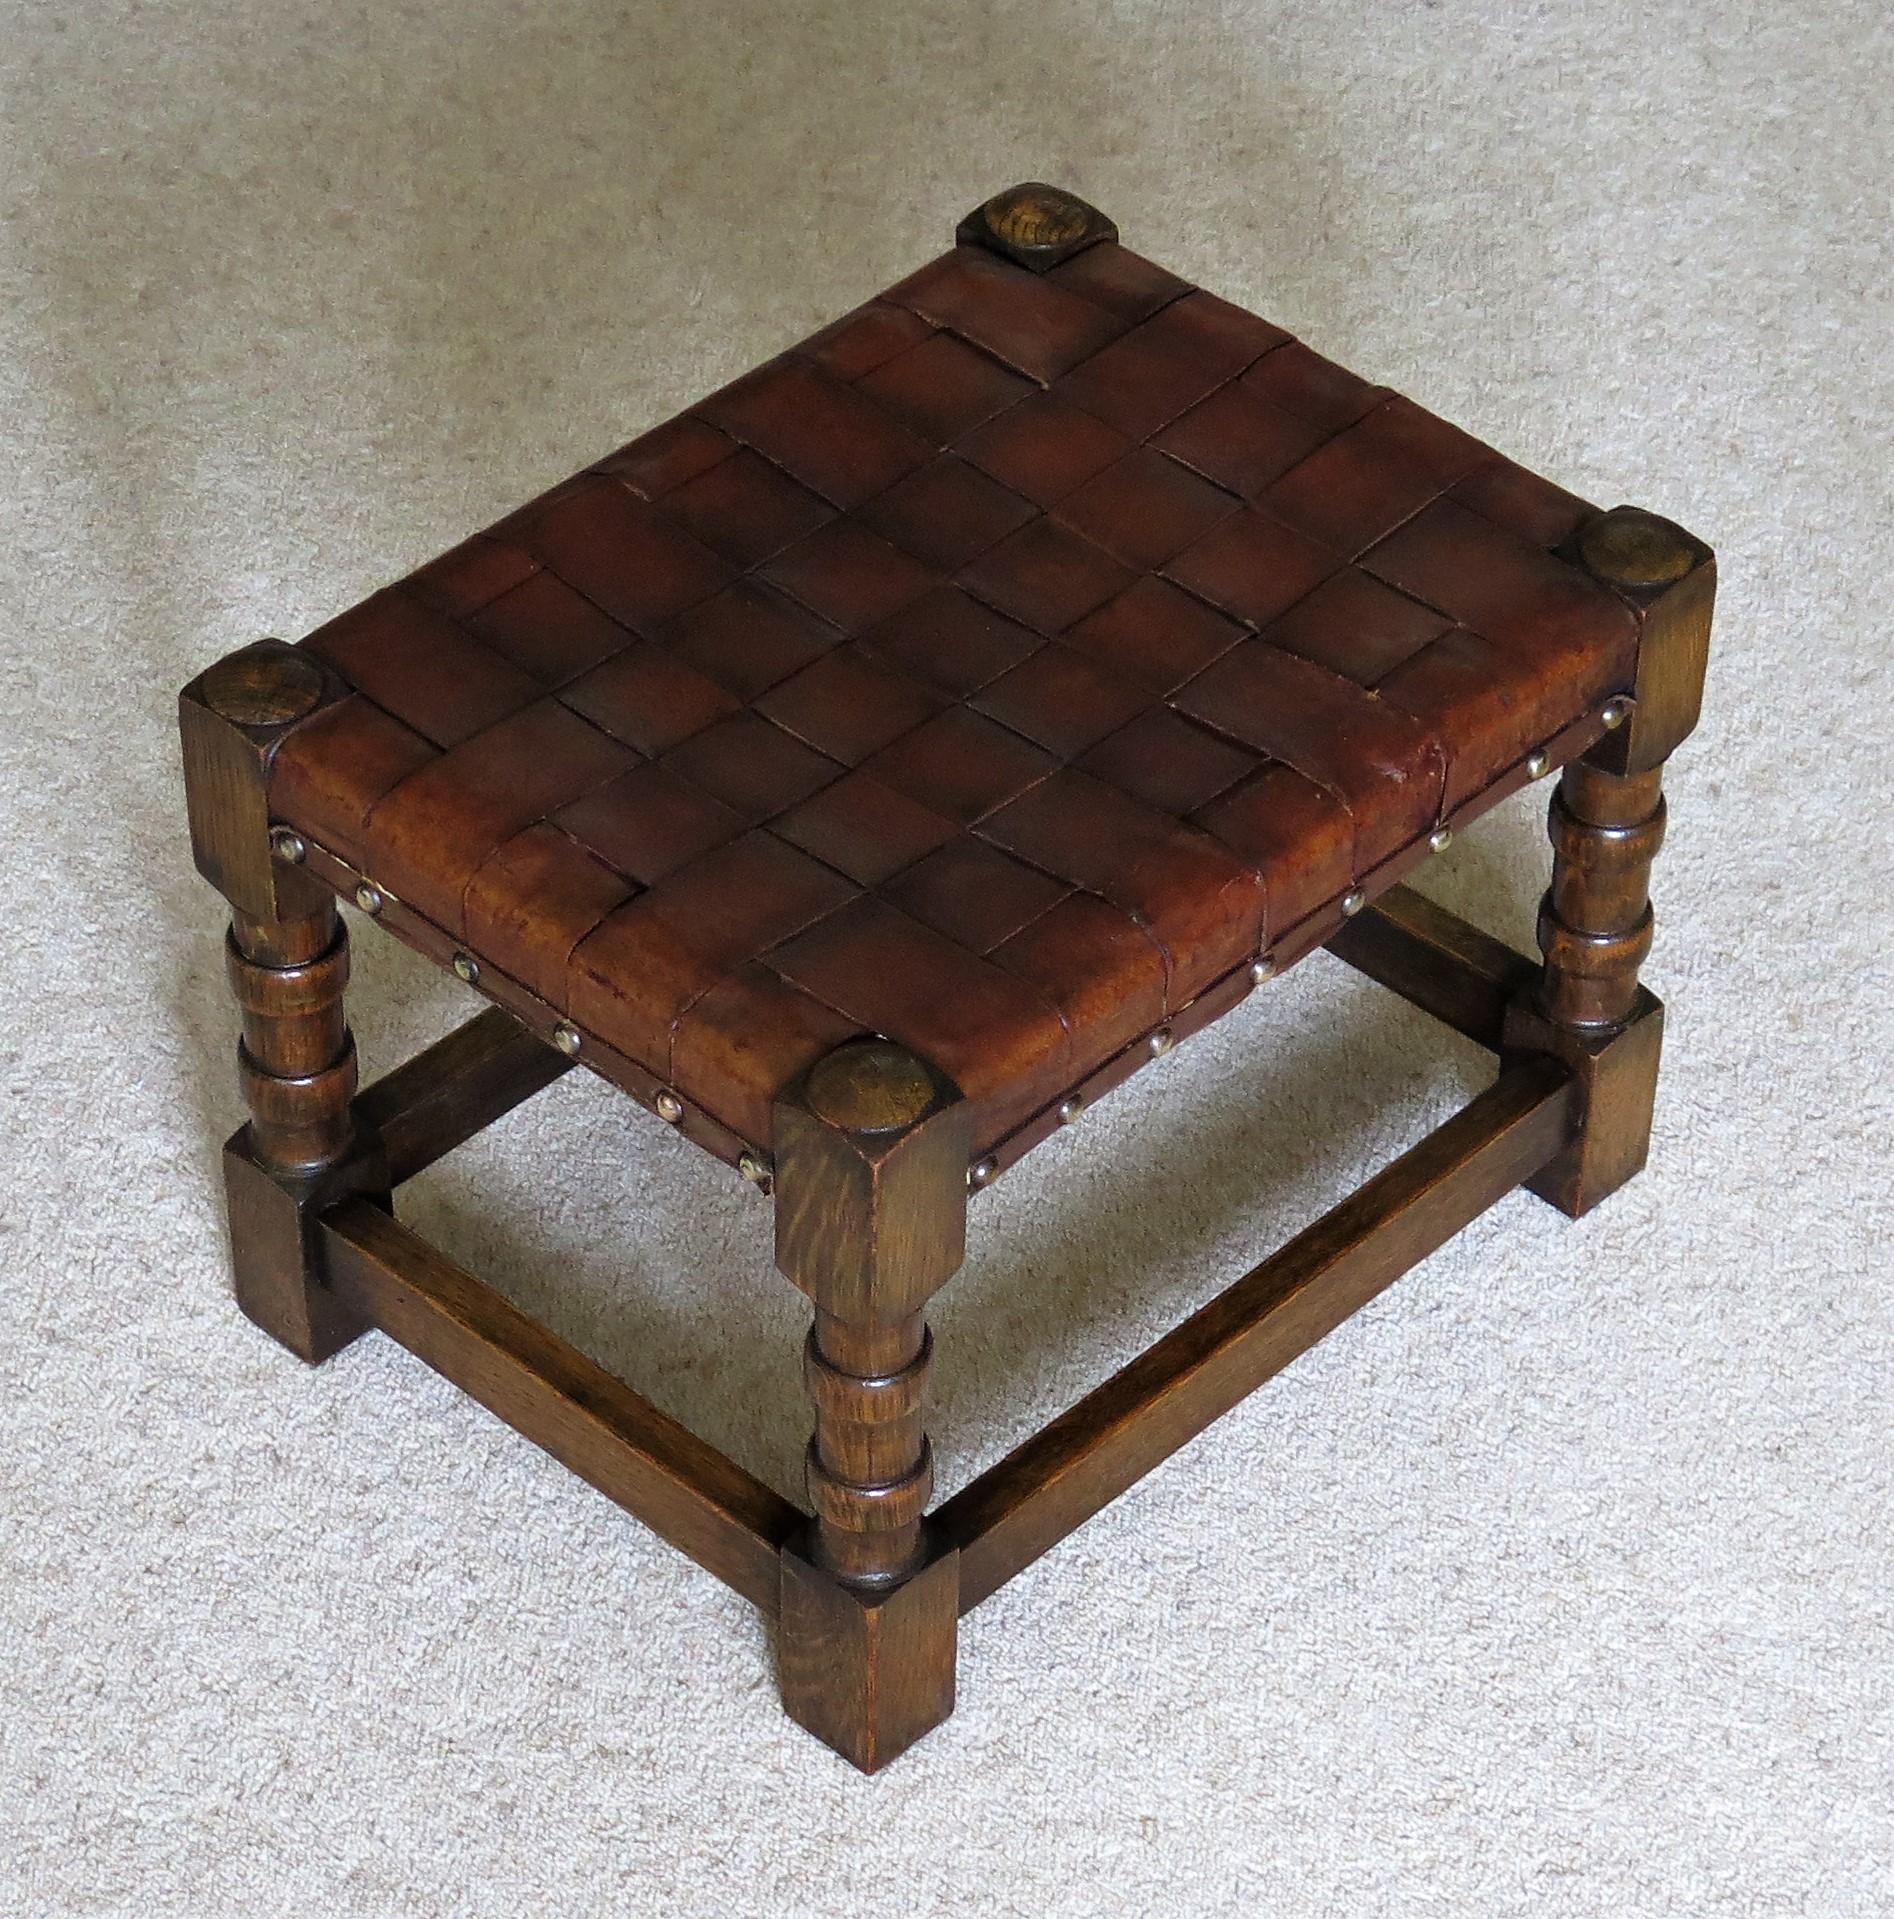 Handmade Oak Stool with Leather Strap Top, Arts & Crafts Late 19th Century For Sale 2